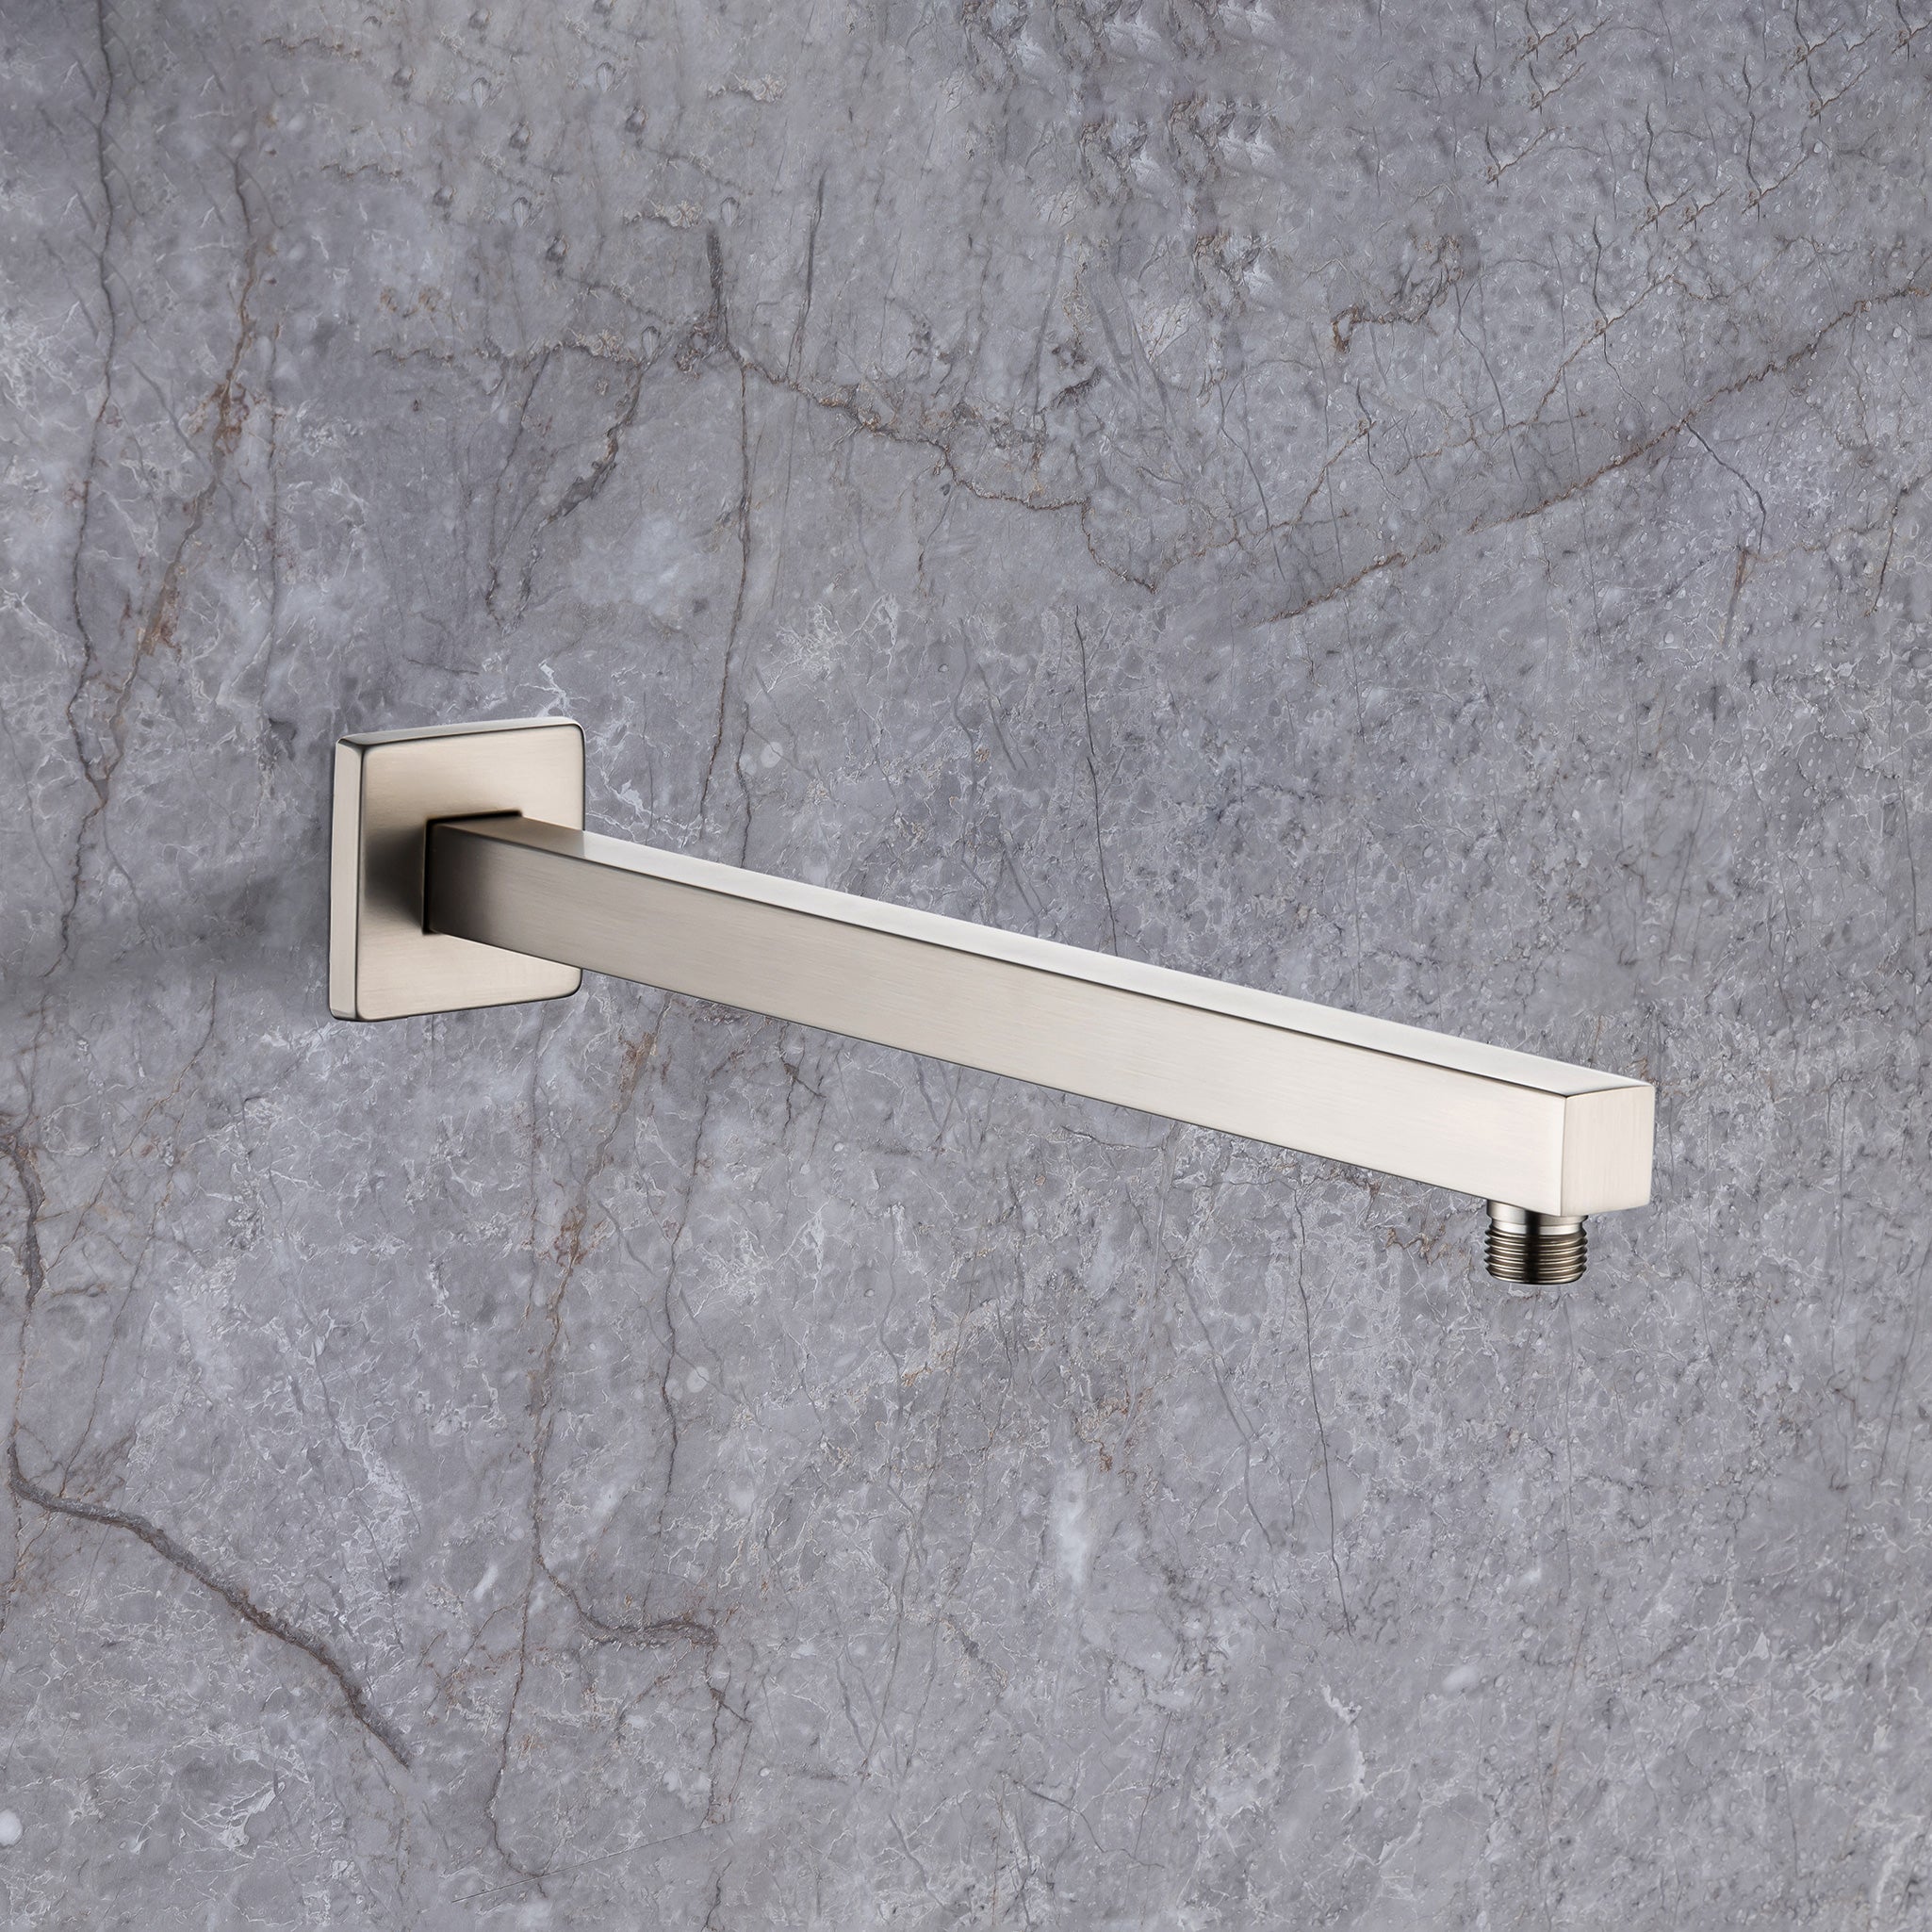 16 Inch Wall Mounted Shower Arm With Flange L1-16